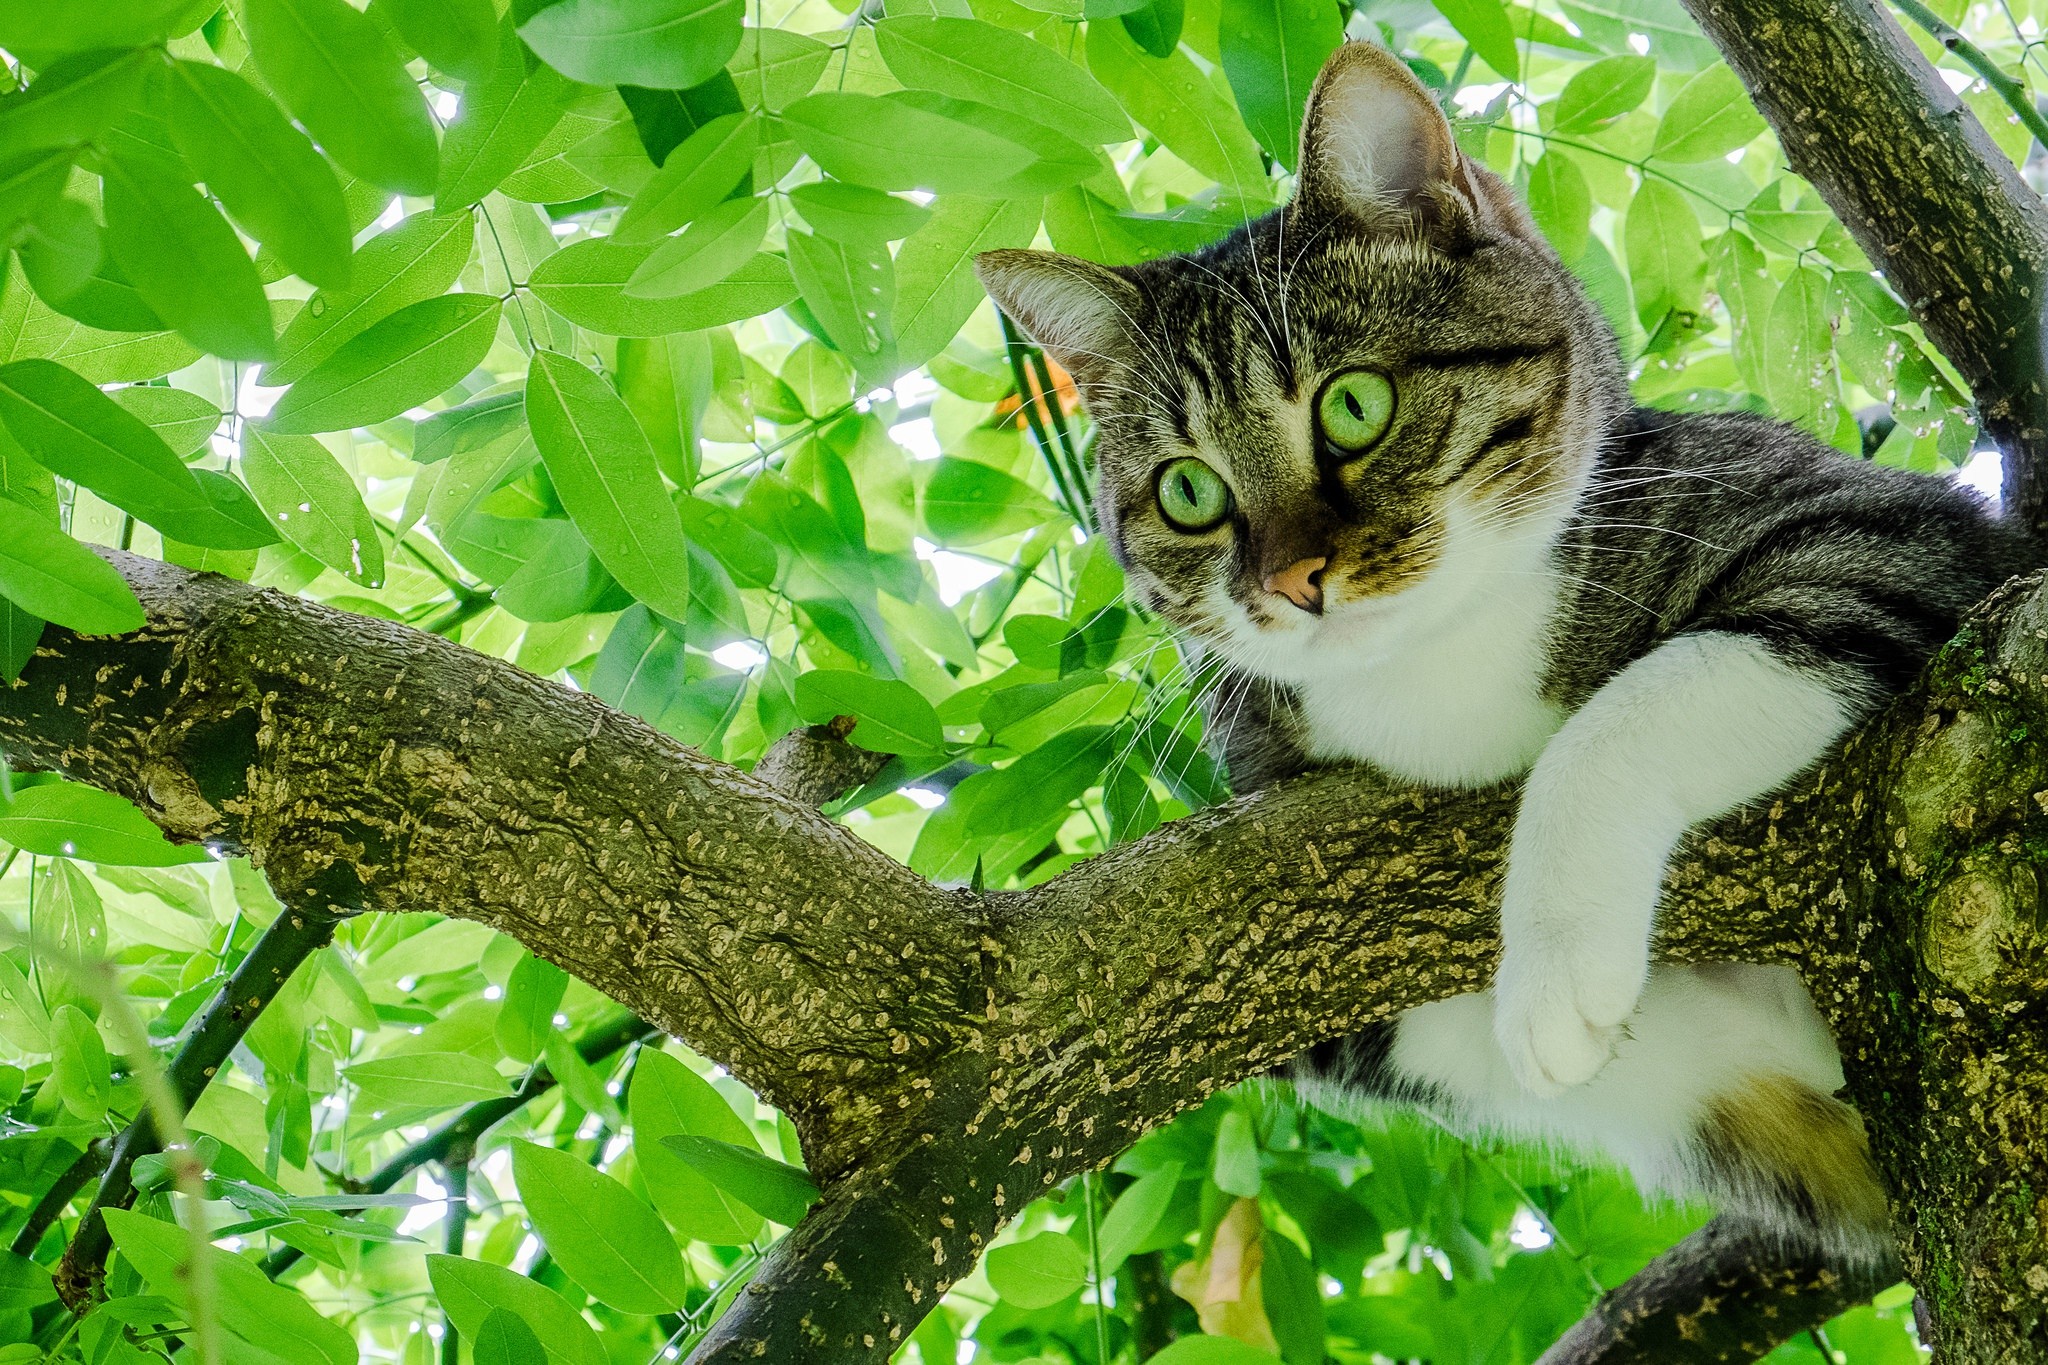 Caturday pic of a cat sitting on a tree branch